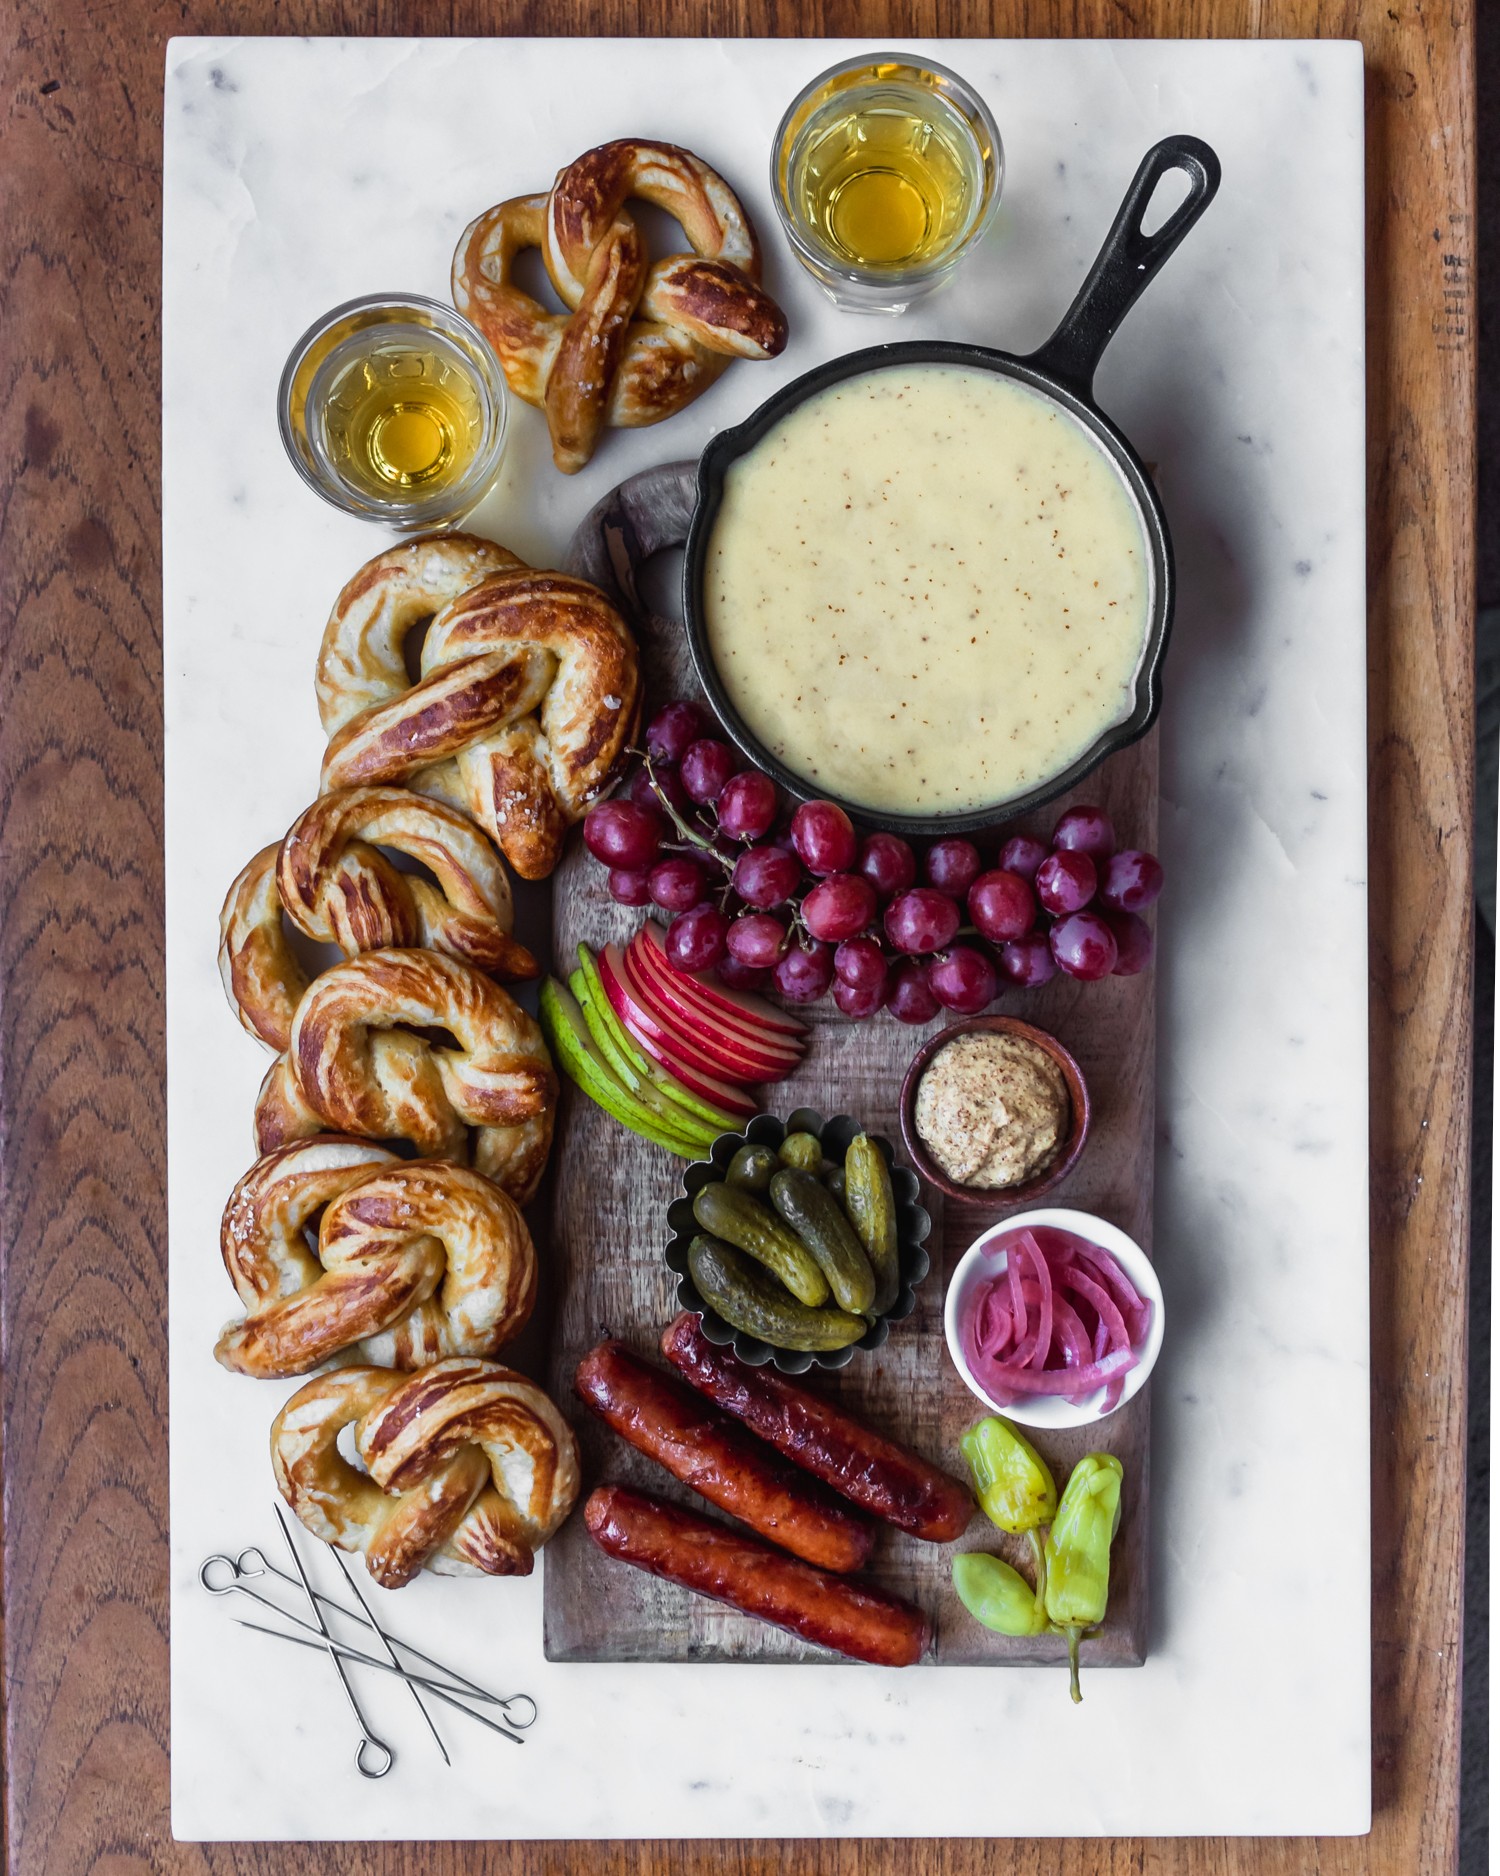 A skillet of beer cheese fondue surrounded by soft pretzels, fruit, pickled vegetables, brats, and beer.